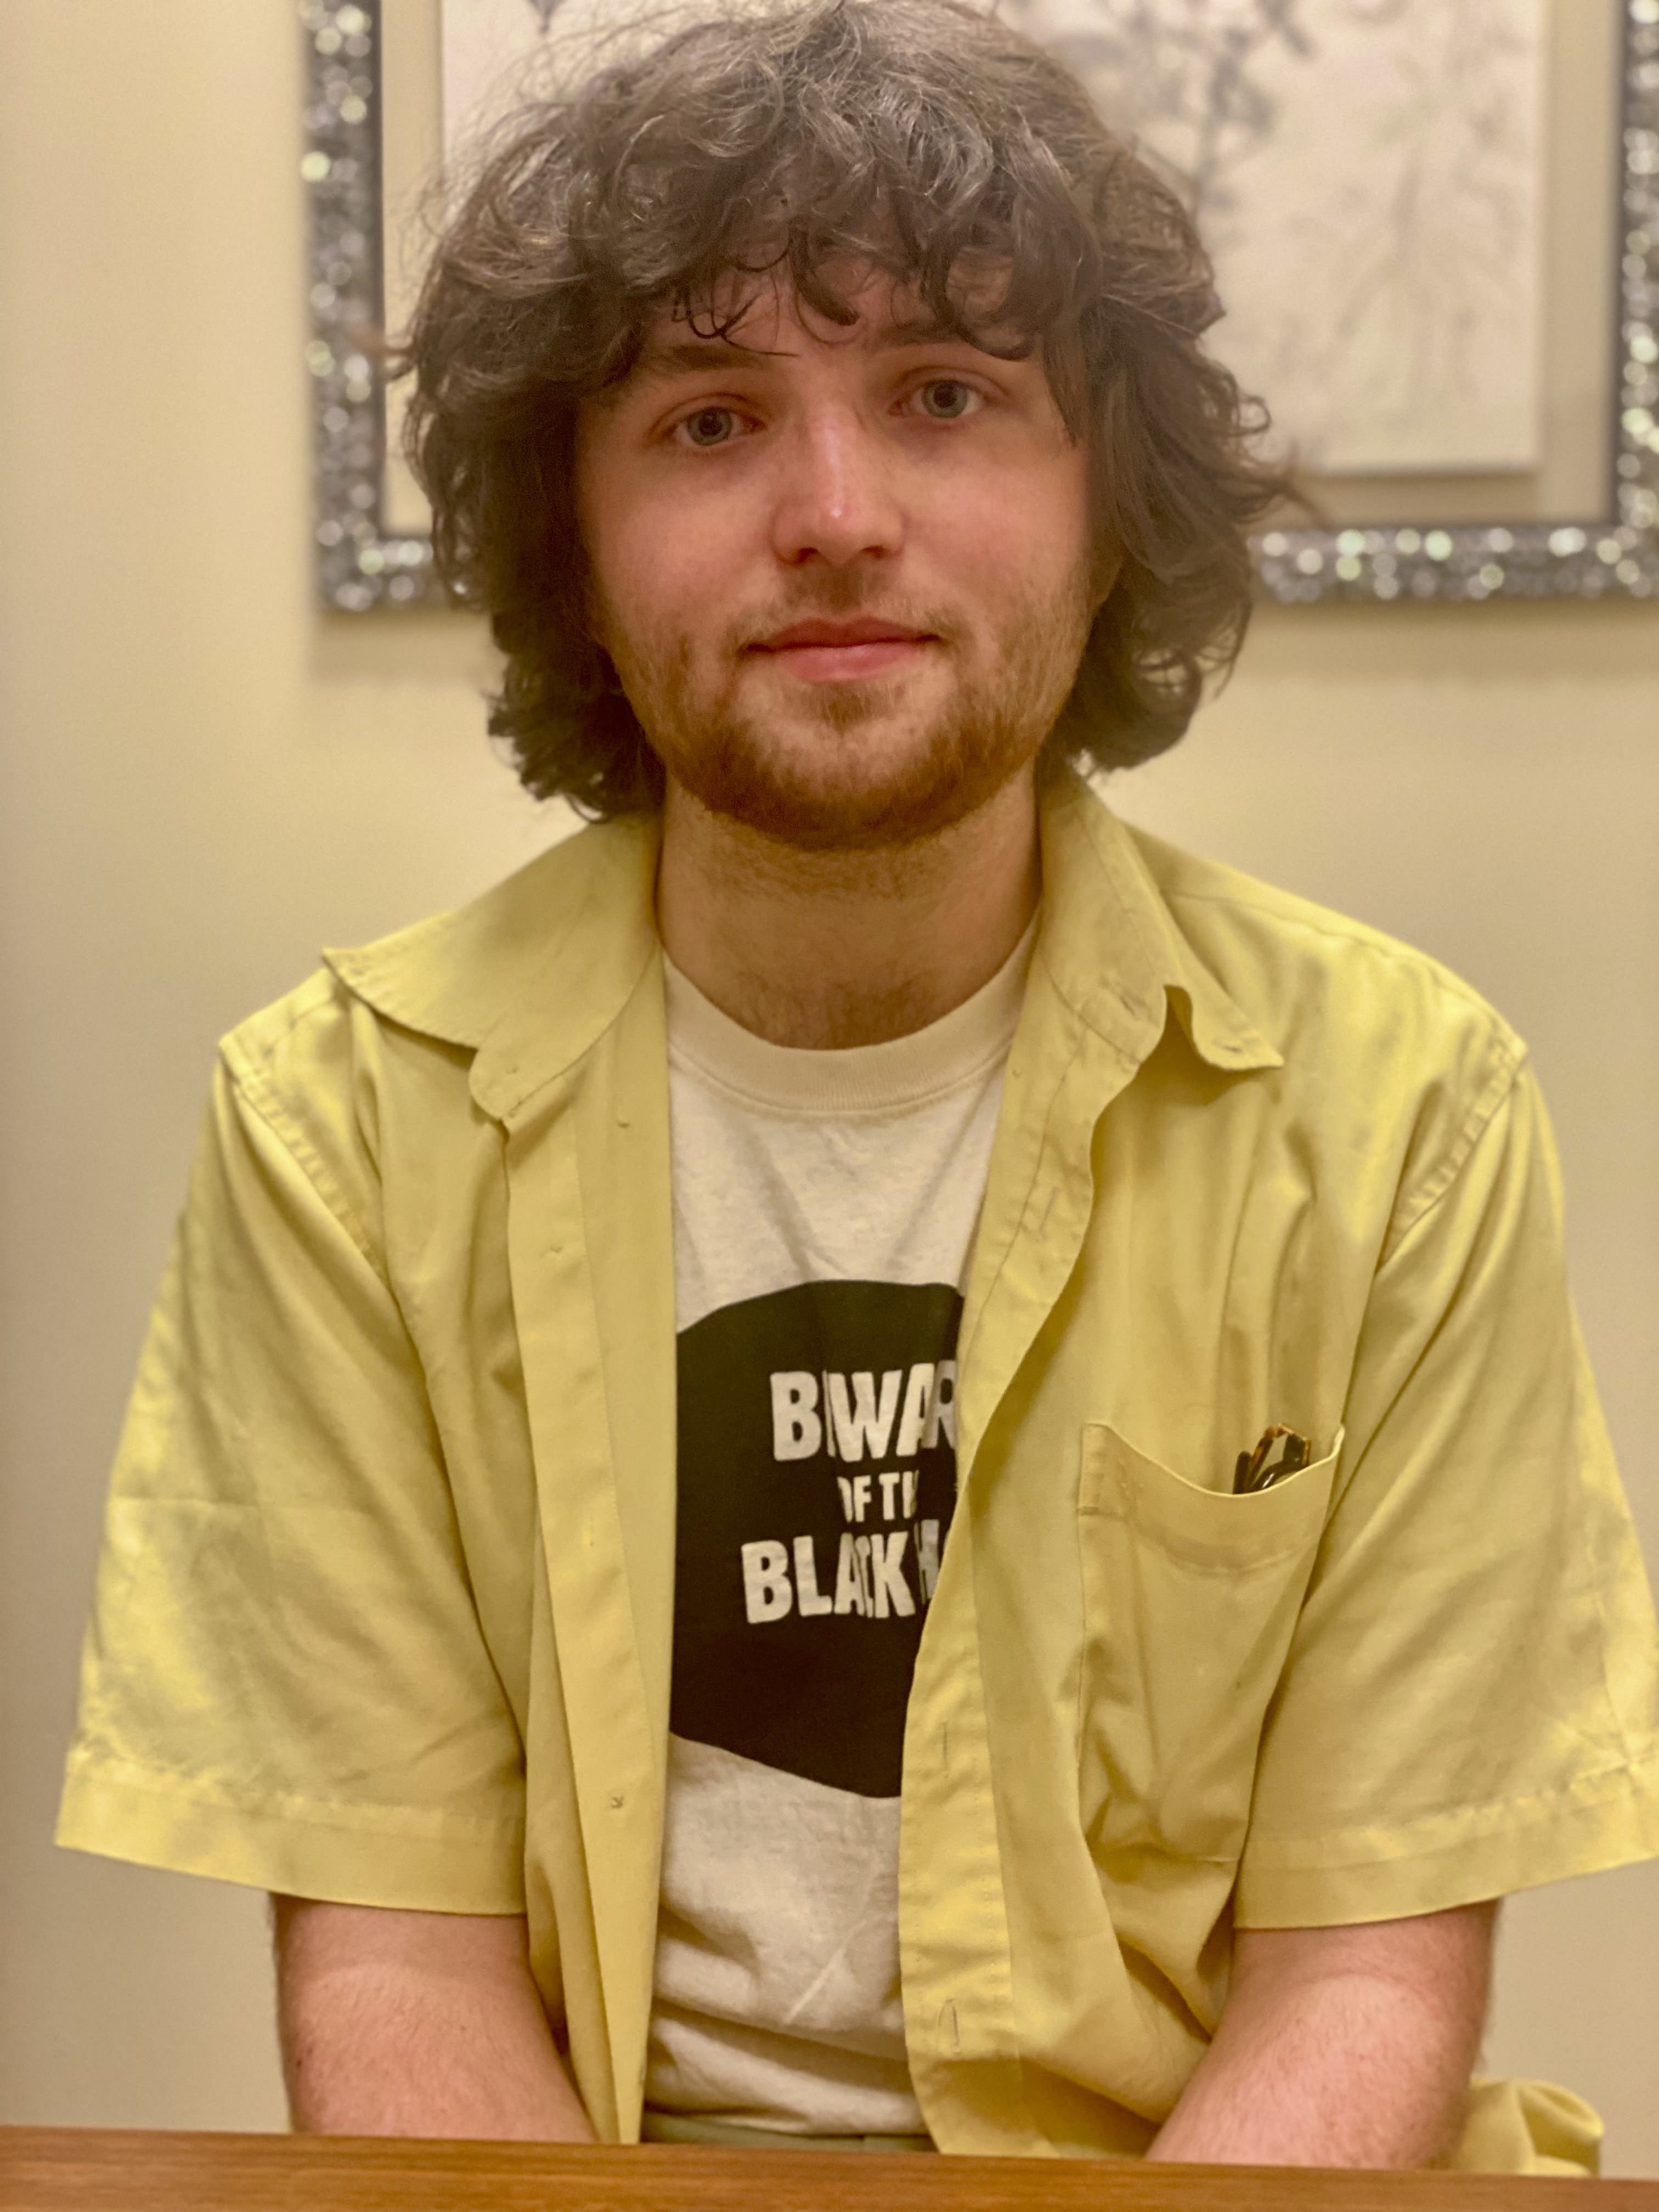 Ben sits and smiles into the camera. He's wearing a white t-shirt with black text and a yellow button-down shirt. His glasses are just visible in the front pocket of the button down.